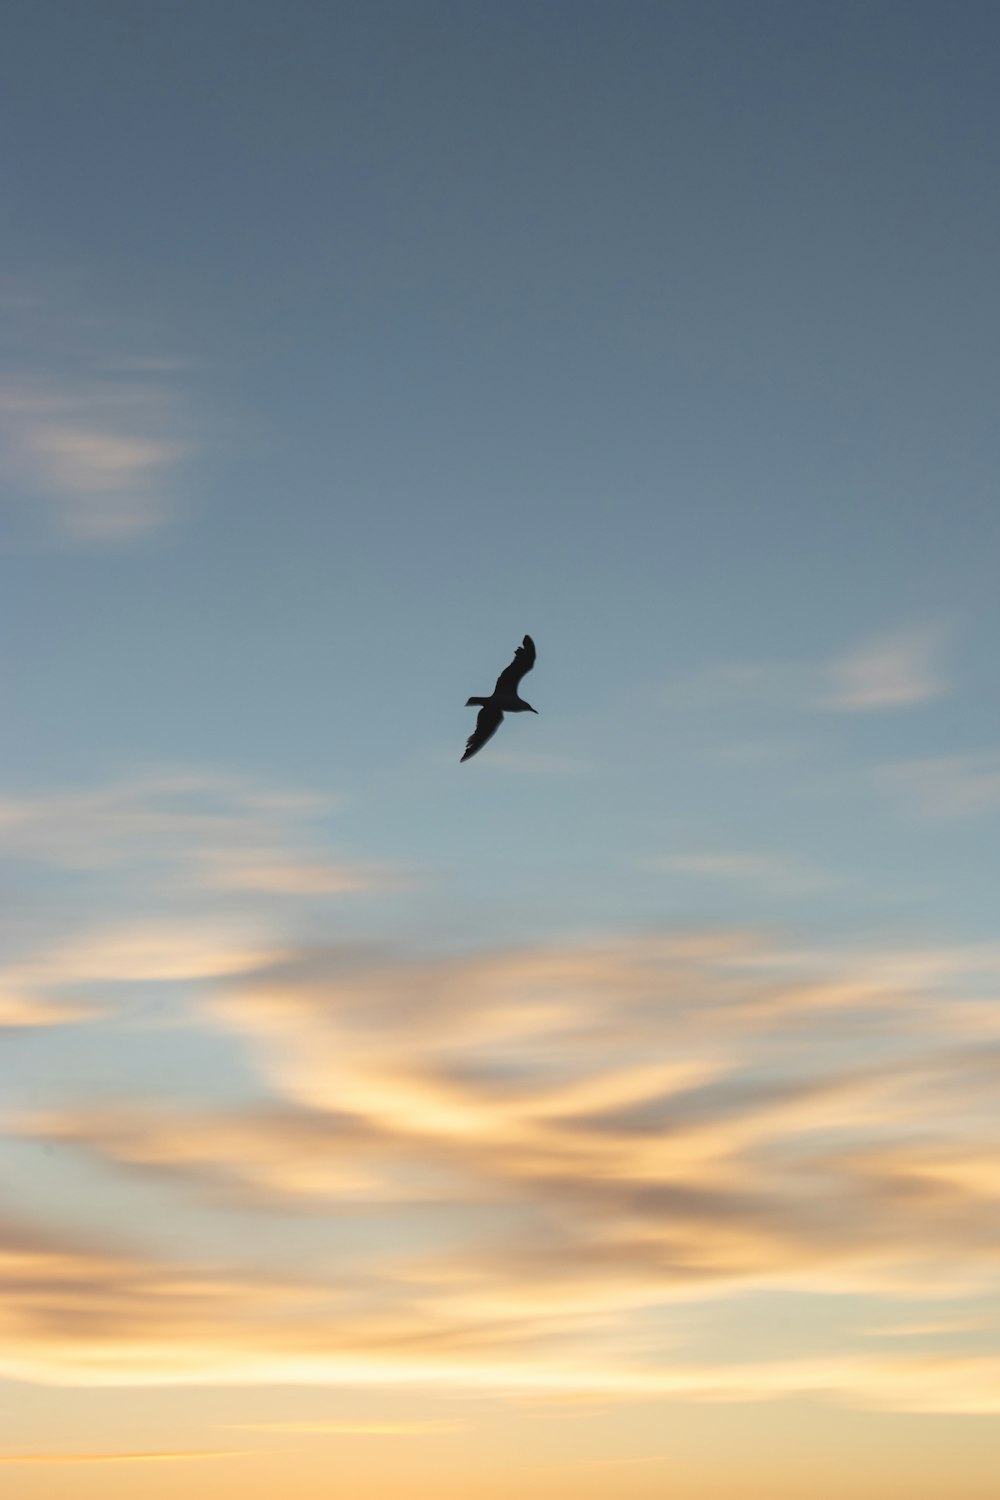 silhouette of bird flying under cloudy sky during daytime